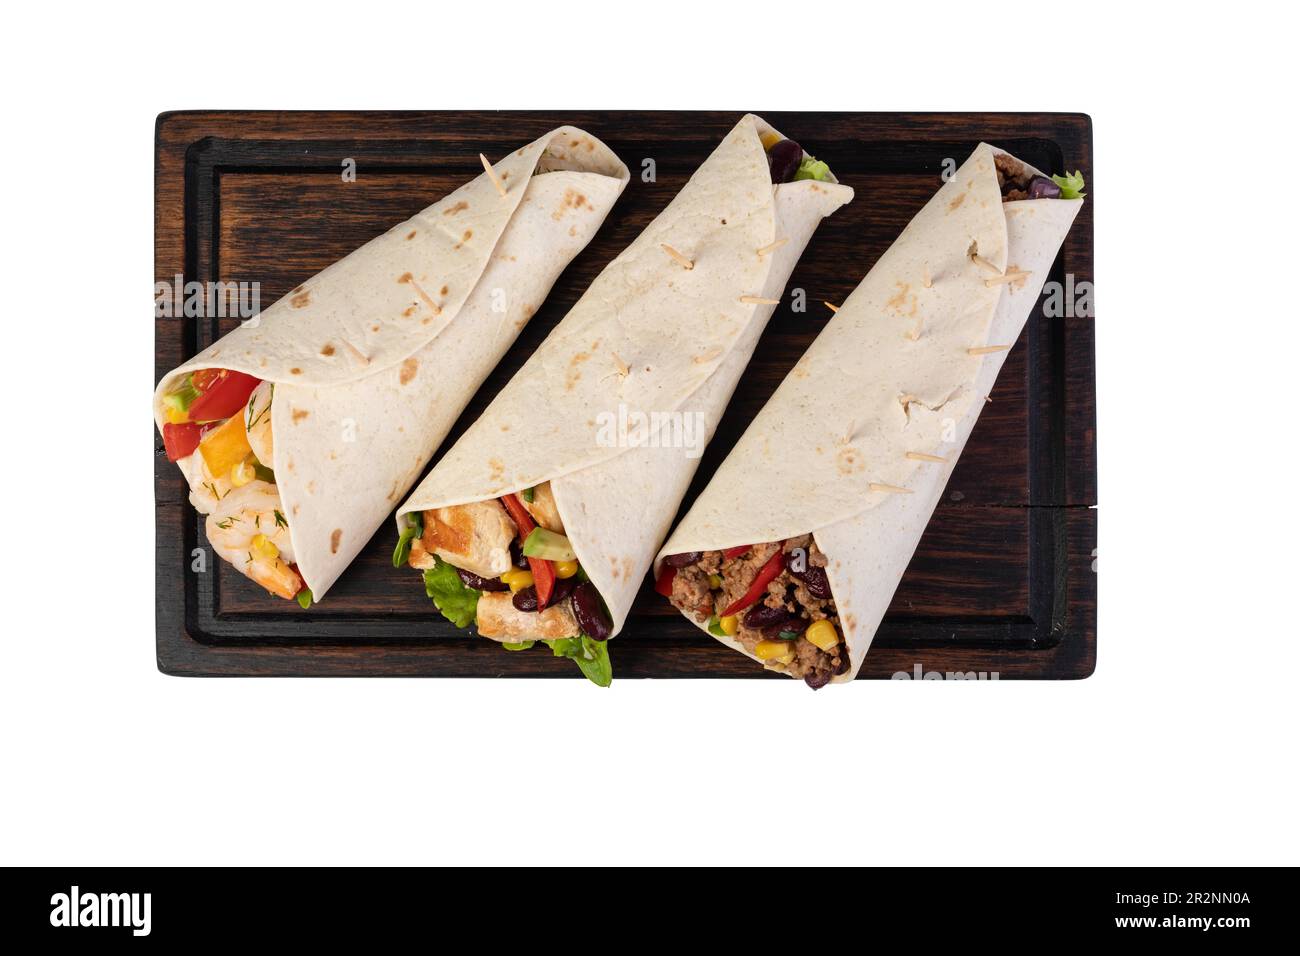 burrito with vegetables and tortilla, isolated on white Stock Photo